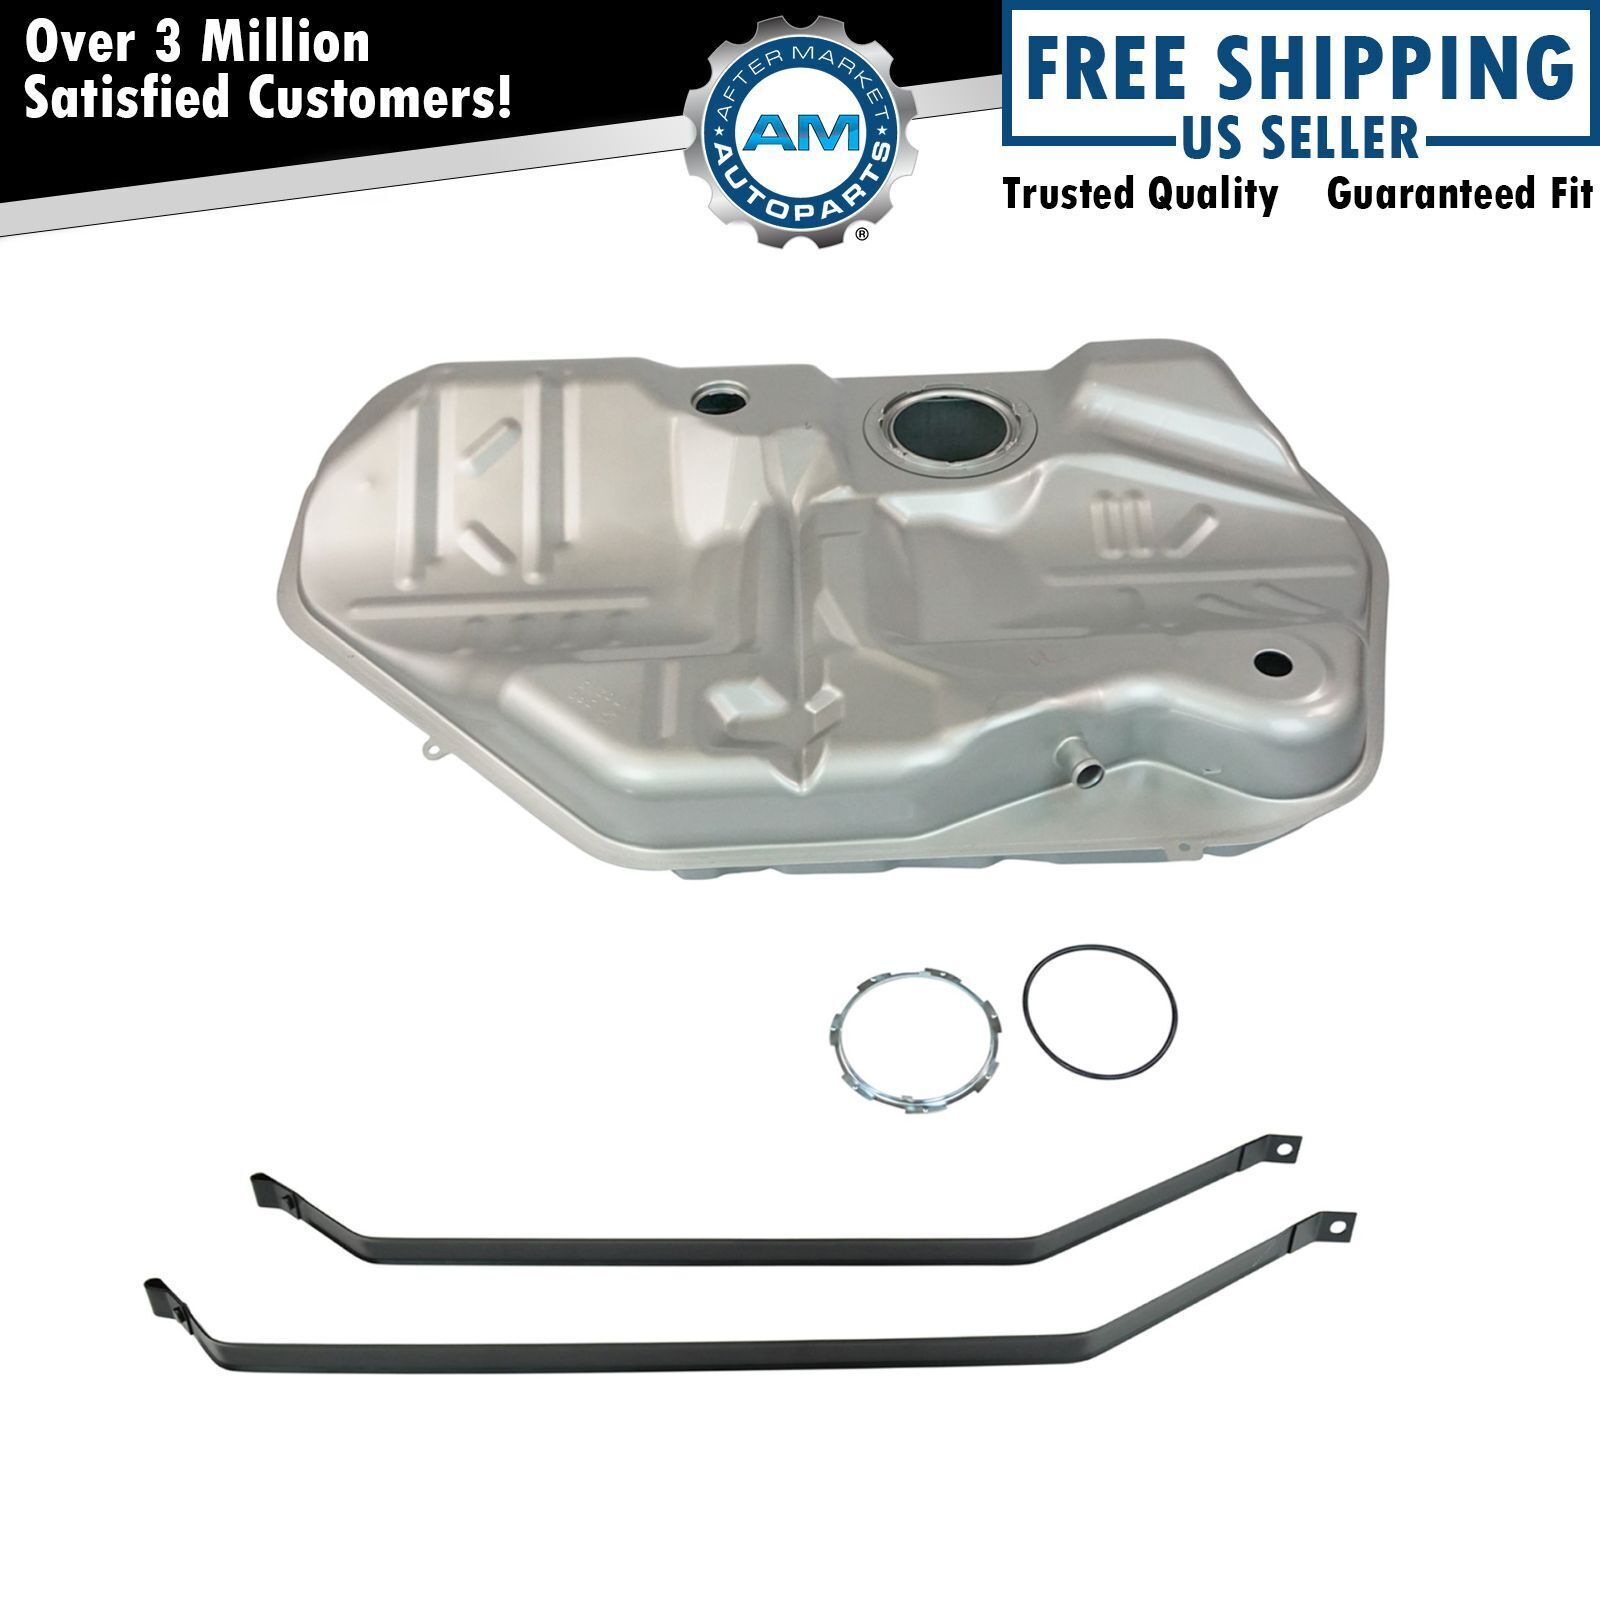 18 Gallon Fuel Gas Tank and Strap Kit Set for Ford Mercury Taurus Sable New